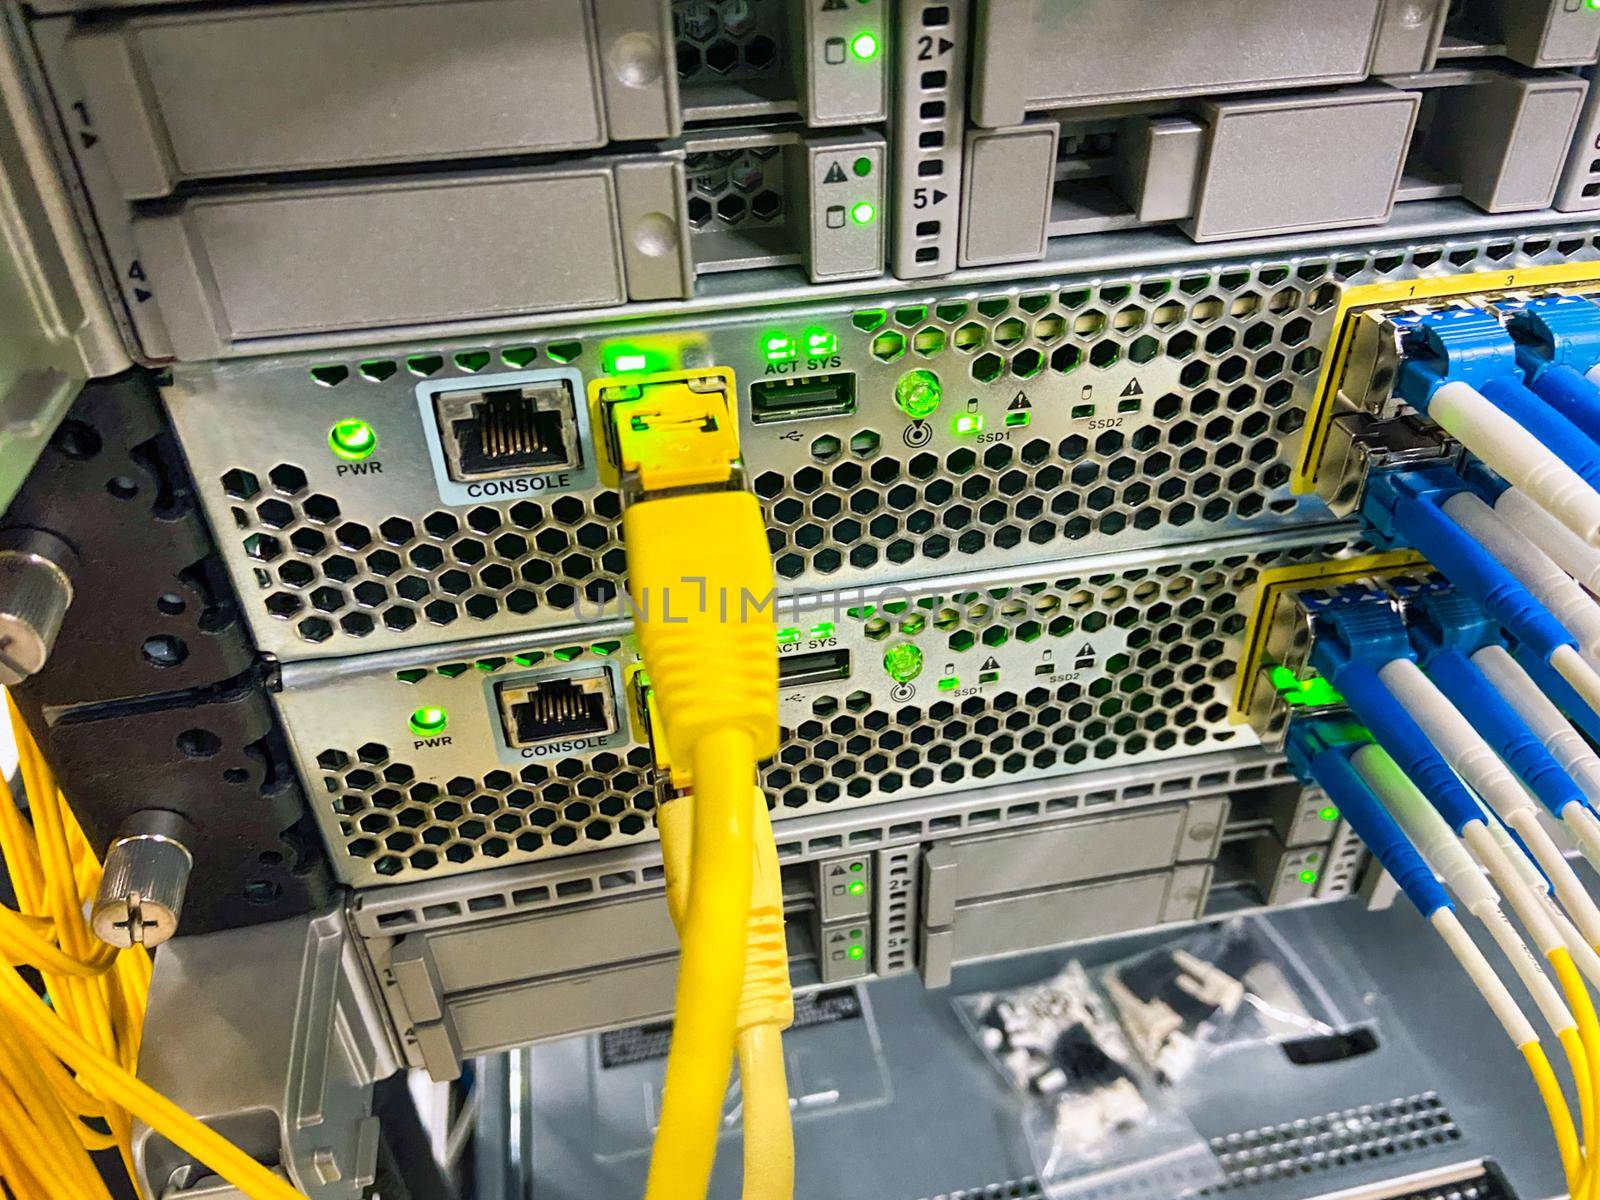 Network equipment with green lights working in a data center.